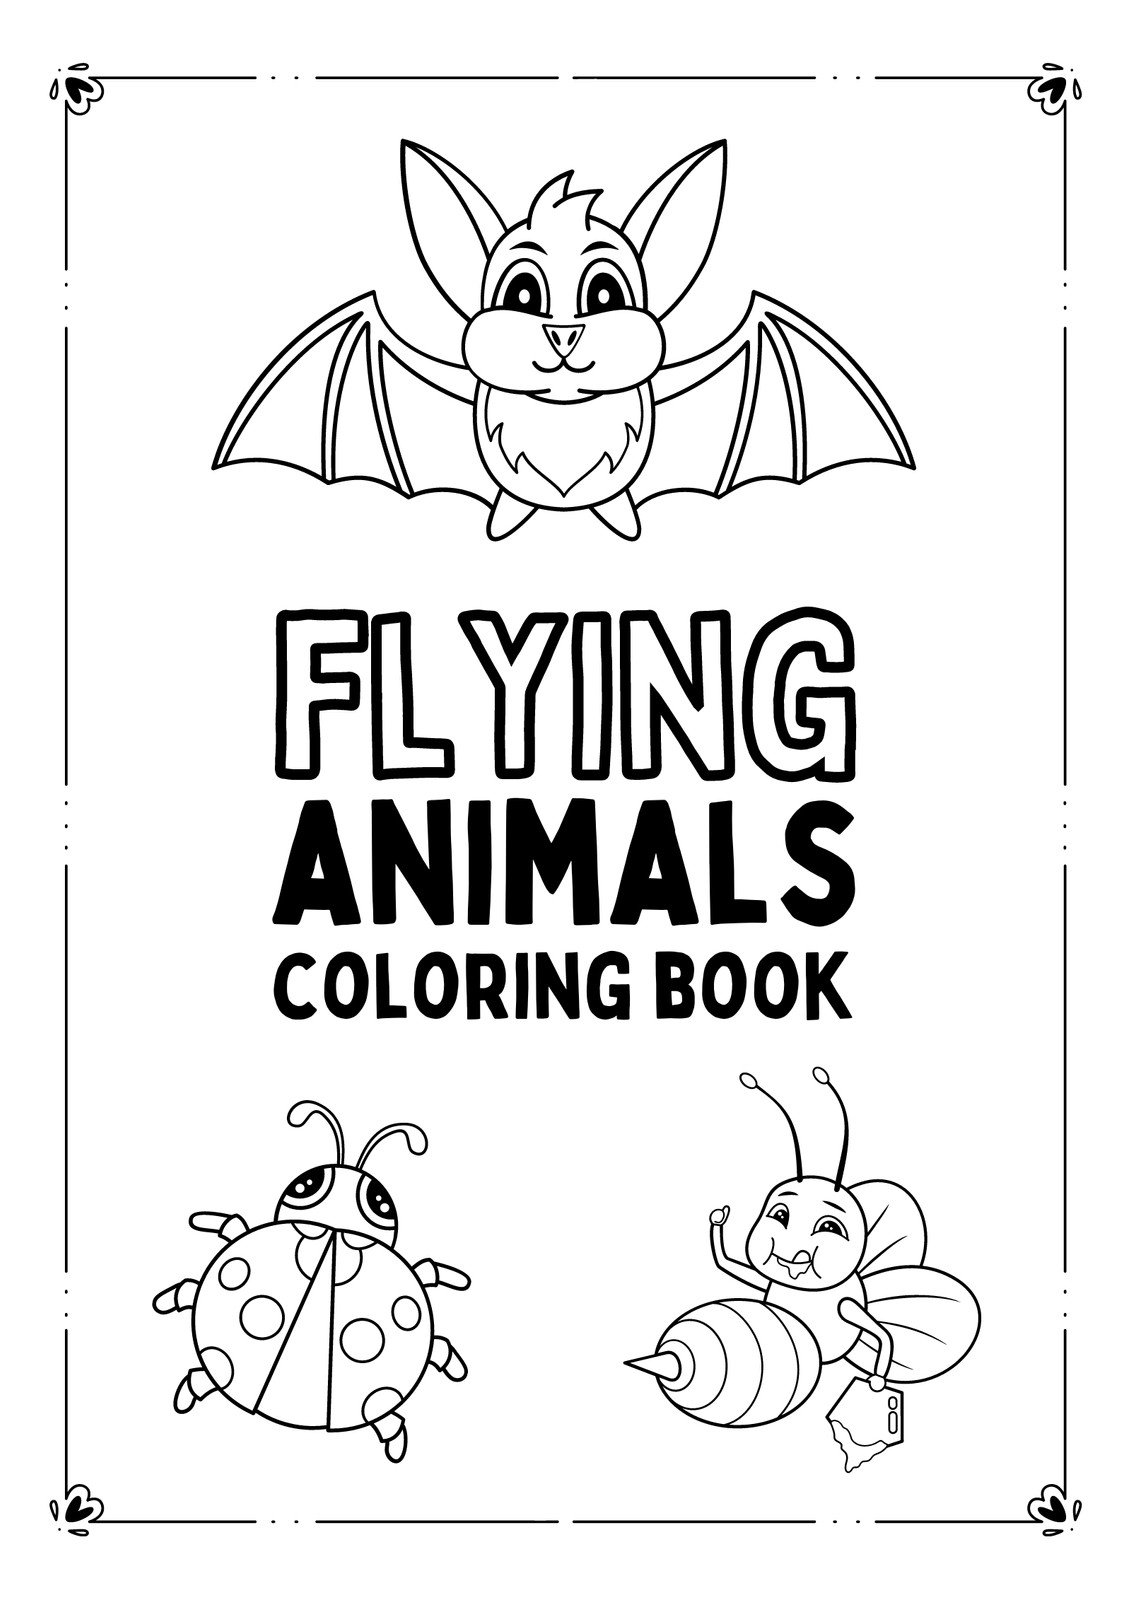 Free printable coloring page templates to customize | Canva